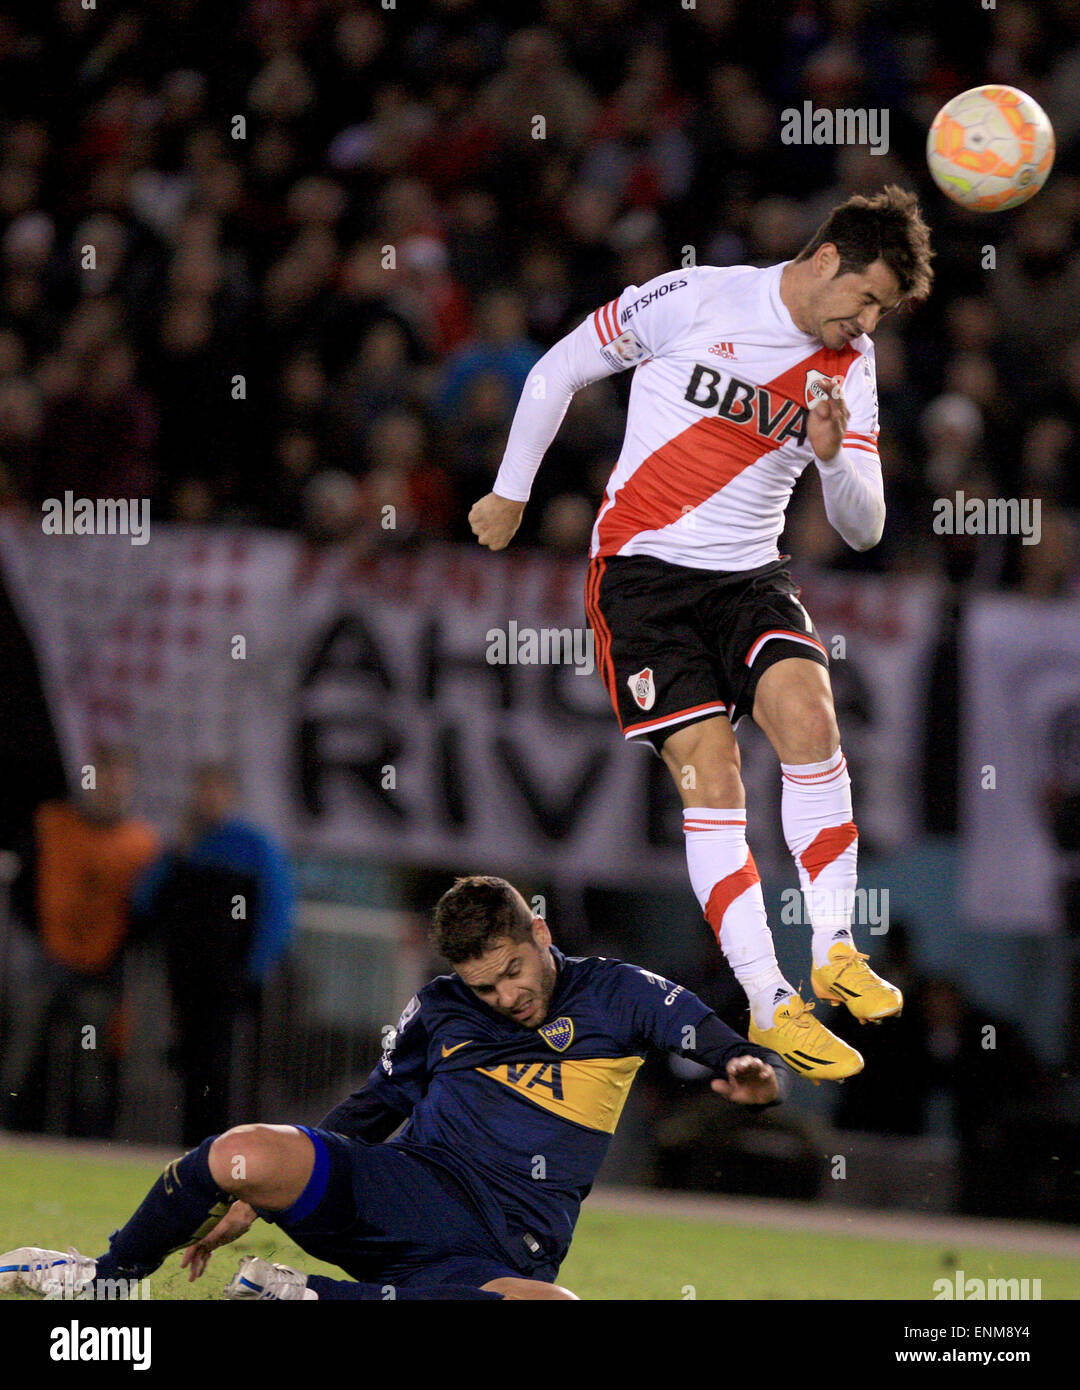 Buenos Aires, Argentina. 7th May, 2015. River Plate's Rodrigo Mora (R) vies for the ball with Boca Juniors' Fernando Gago during their first leg match of the Libertadores Cup round of 16, at Antonio Vespucio Liberti stadium in Buenos Aires, capital of Argentina, on May 7, 2015. River Plate won with 1-0. Credit:  Martin Zabala/Xinhua/Alamy Live News Stock Photo